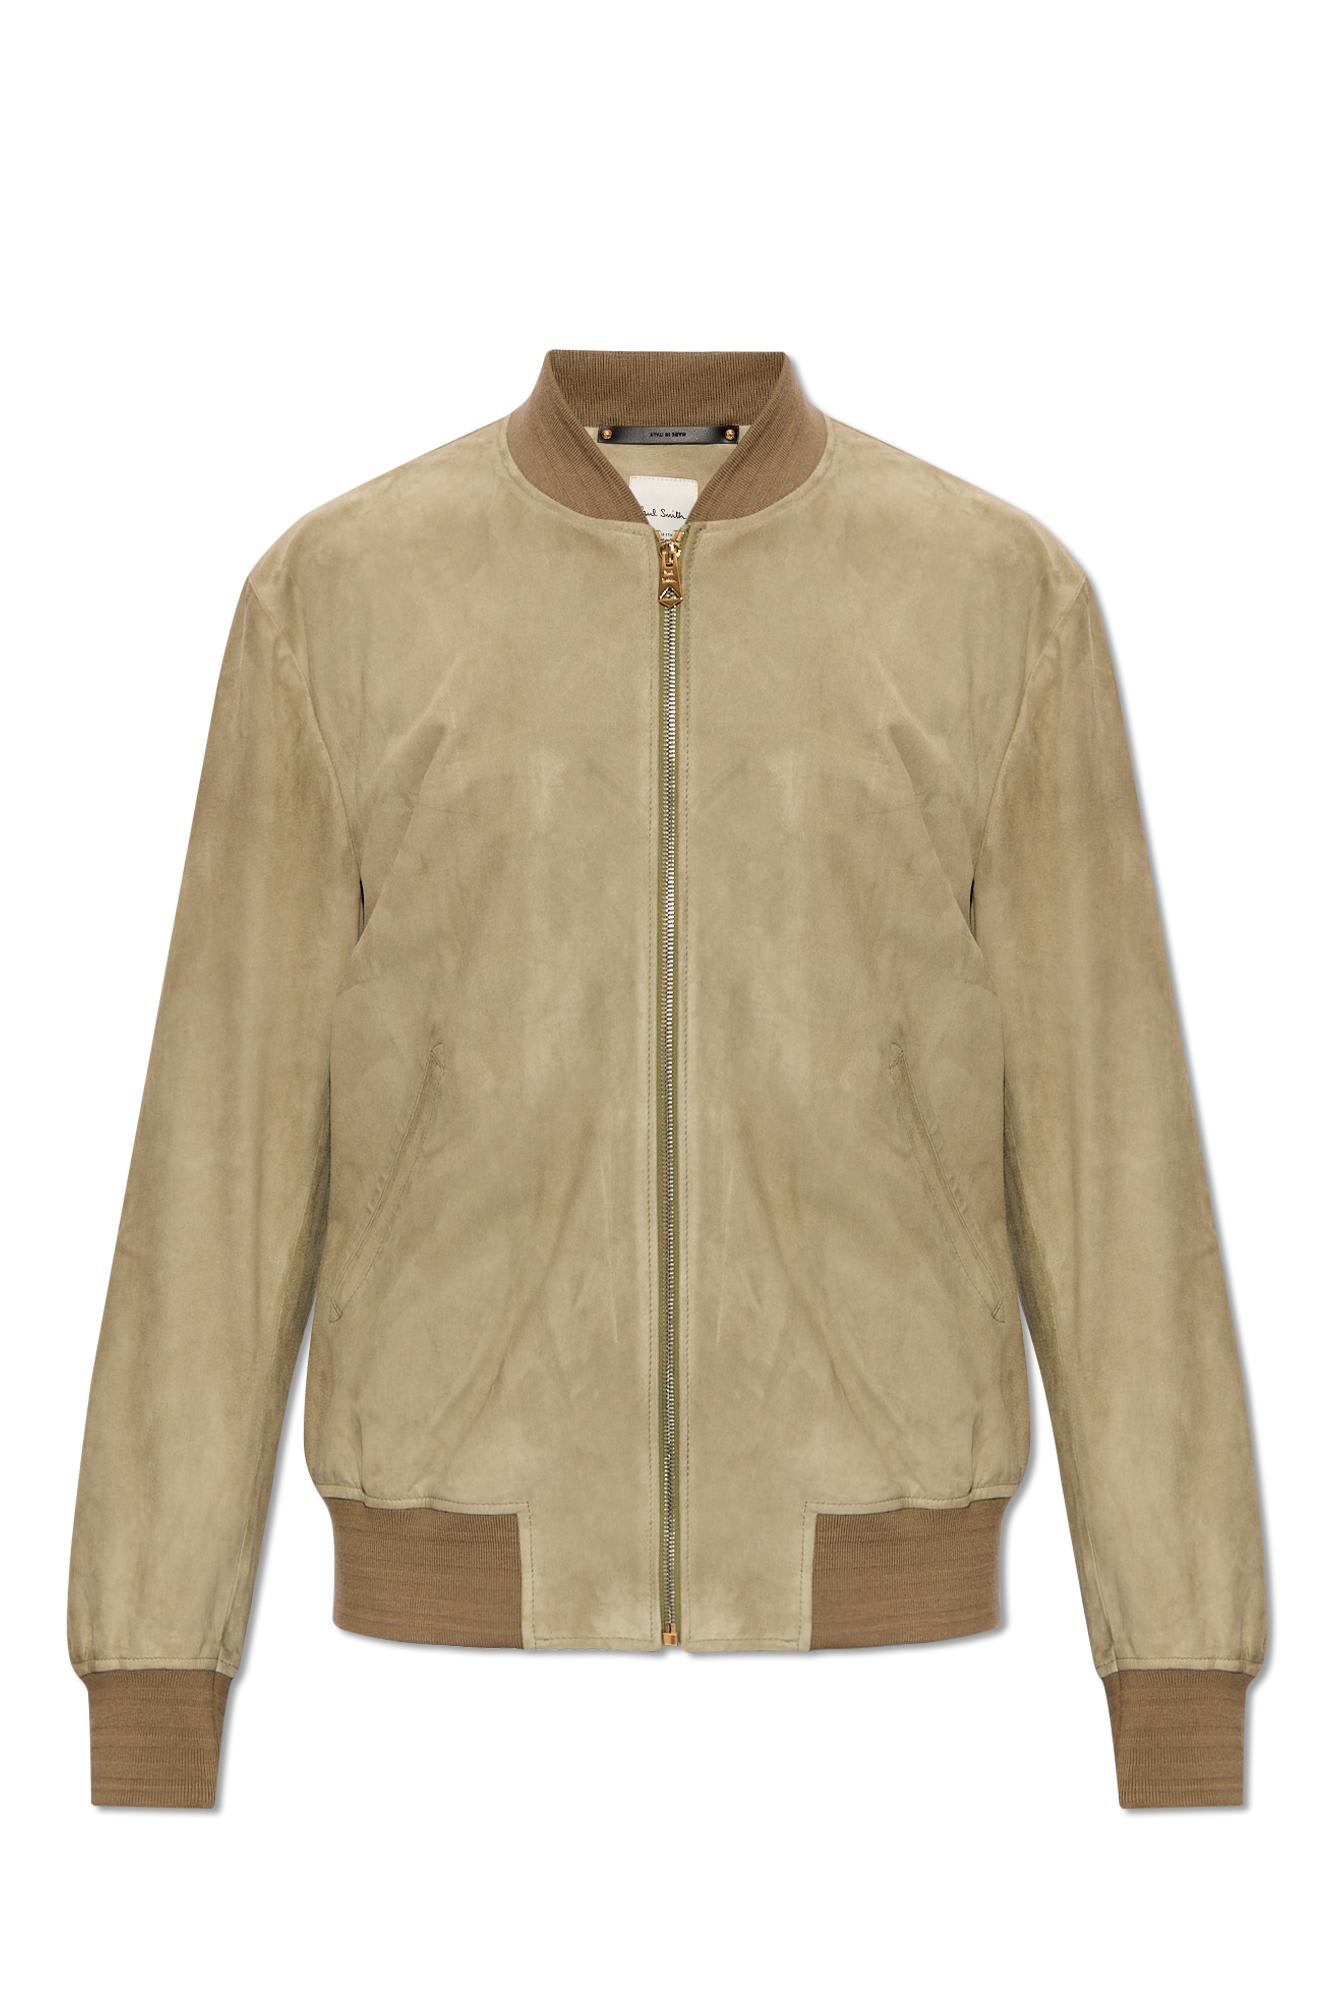 paul smith suede bomber jacket